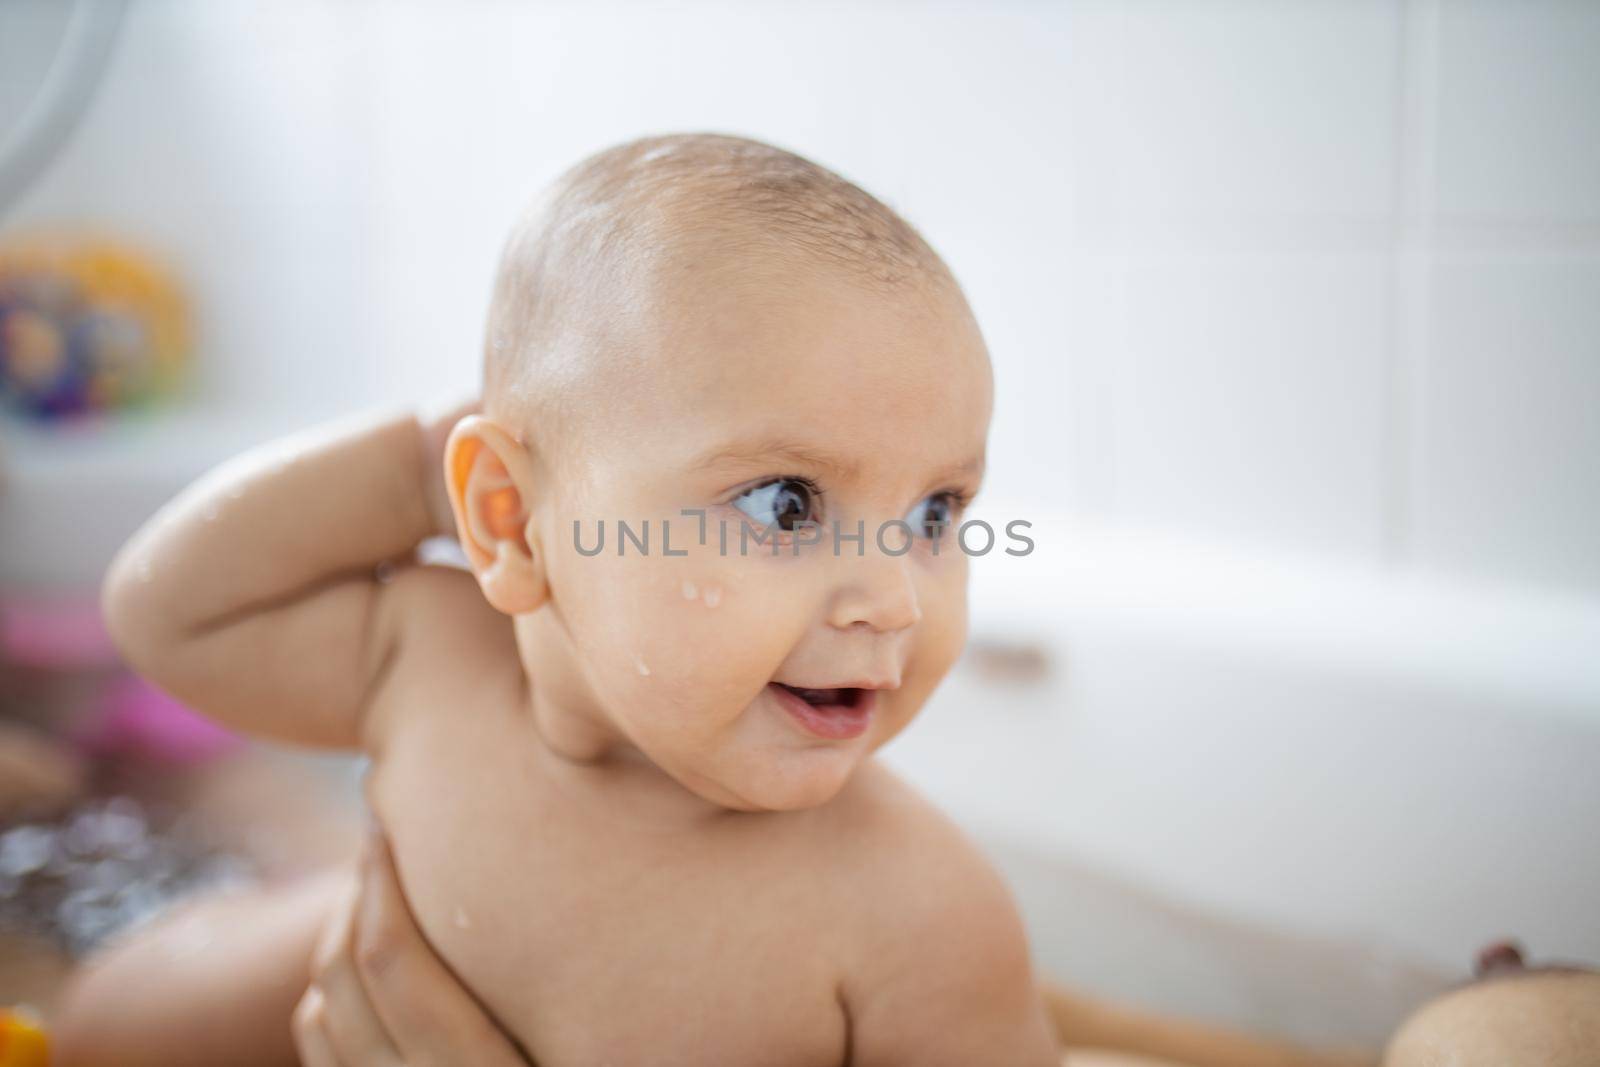 Happy and smiling baby in a white bathtub by Kanelbulle